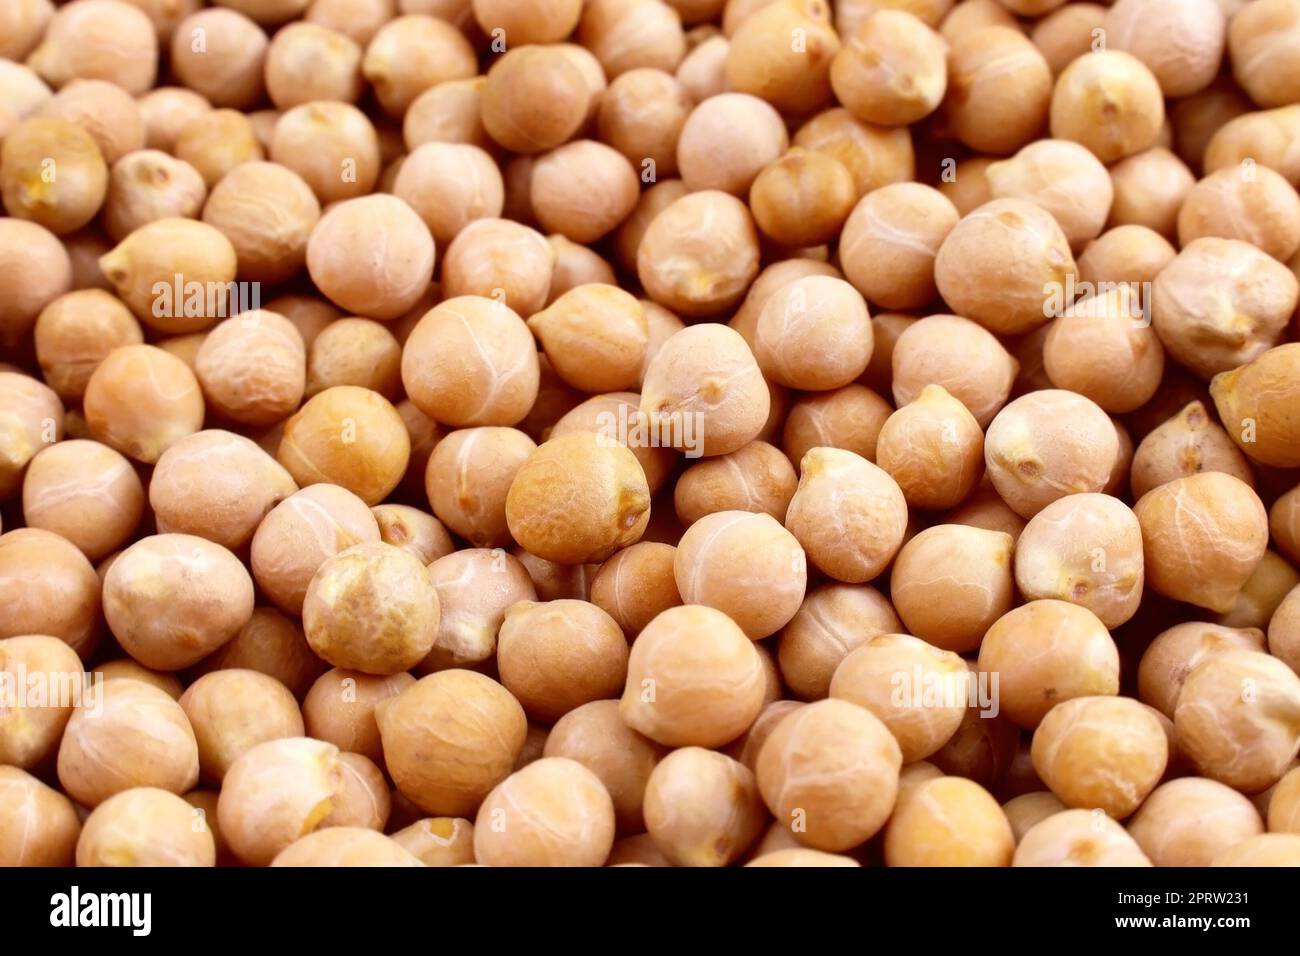 Yellow dried chickpeas or chick peas texture close up. Stock Photo